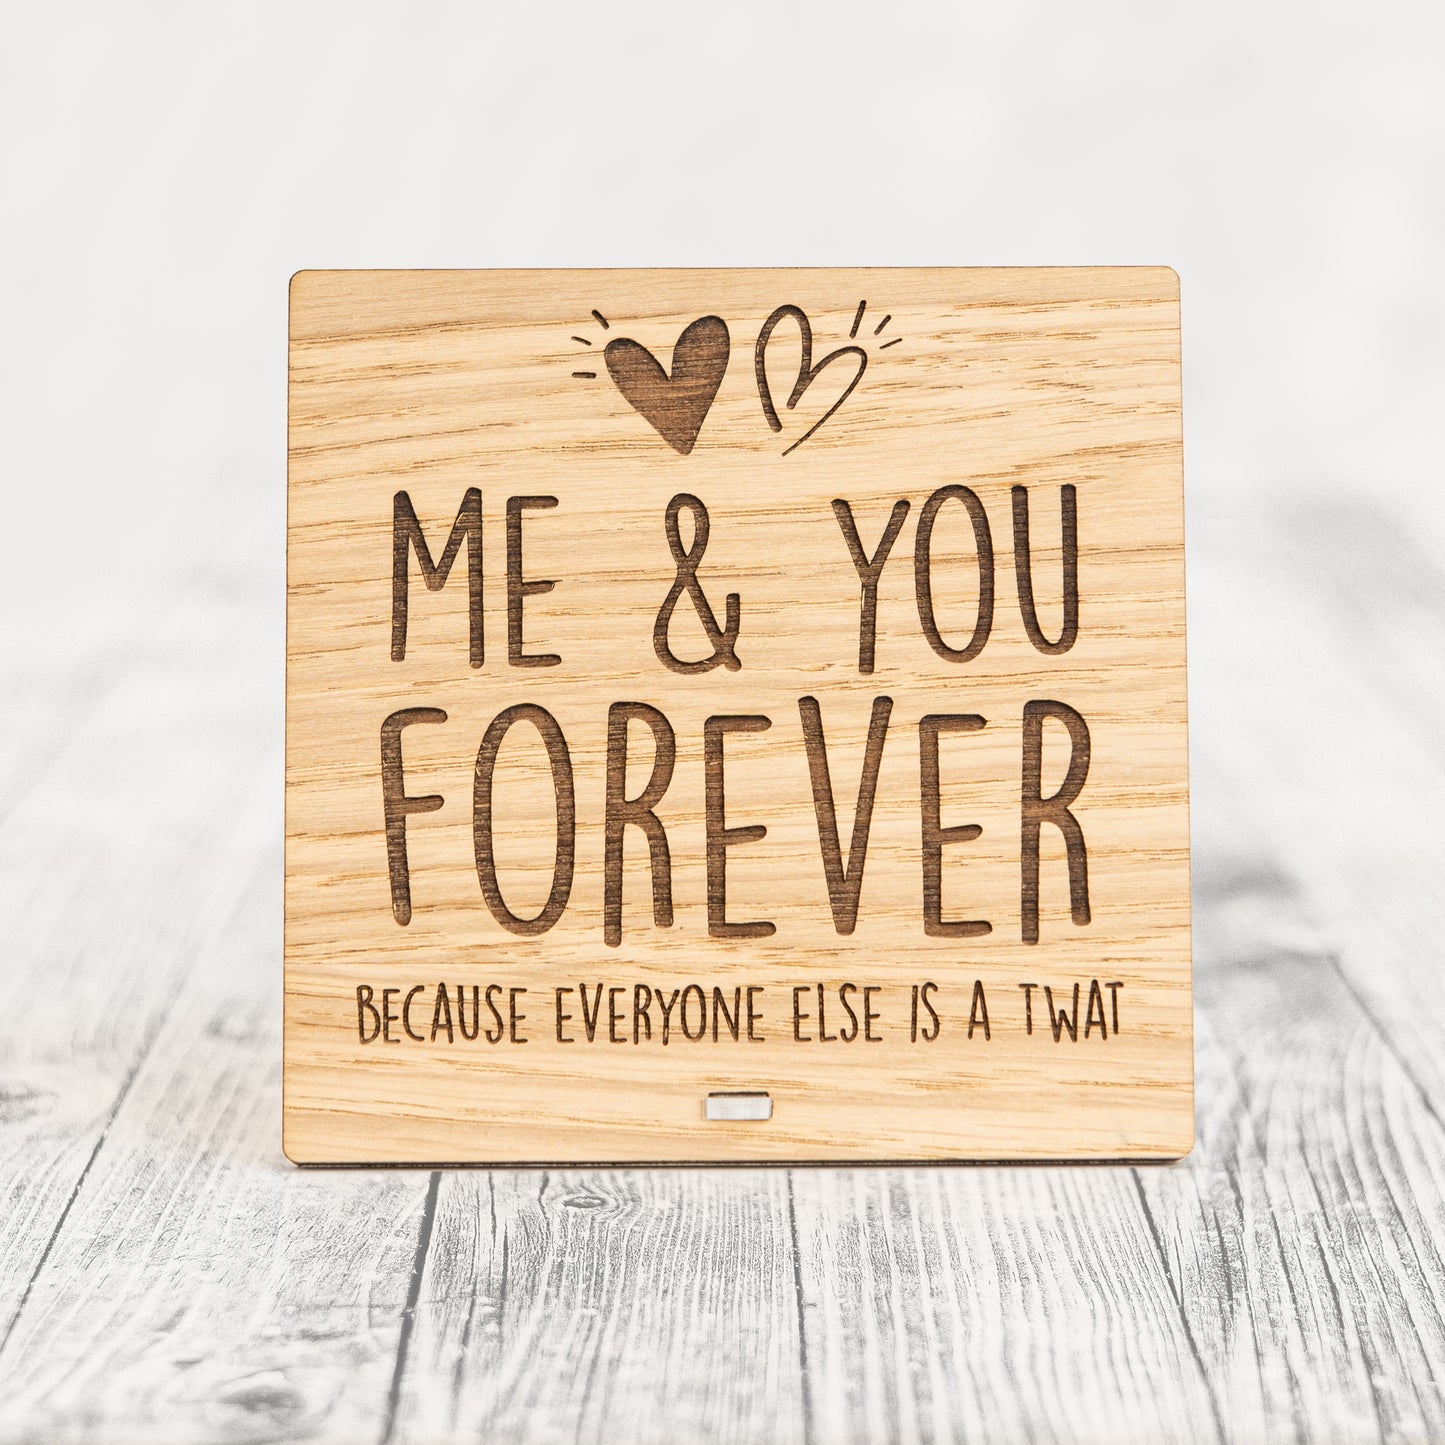 ME AND YOU FOREVER - BECAUSE EVERYONE ELSE IS A TWAT - Funny Valentines Day Plaque